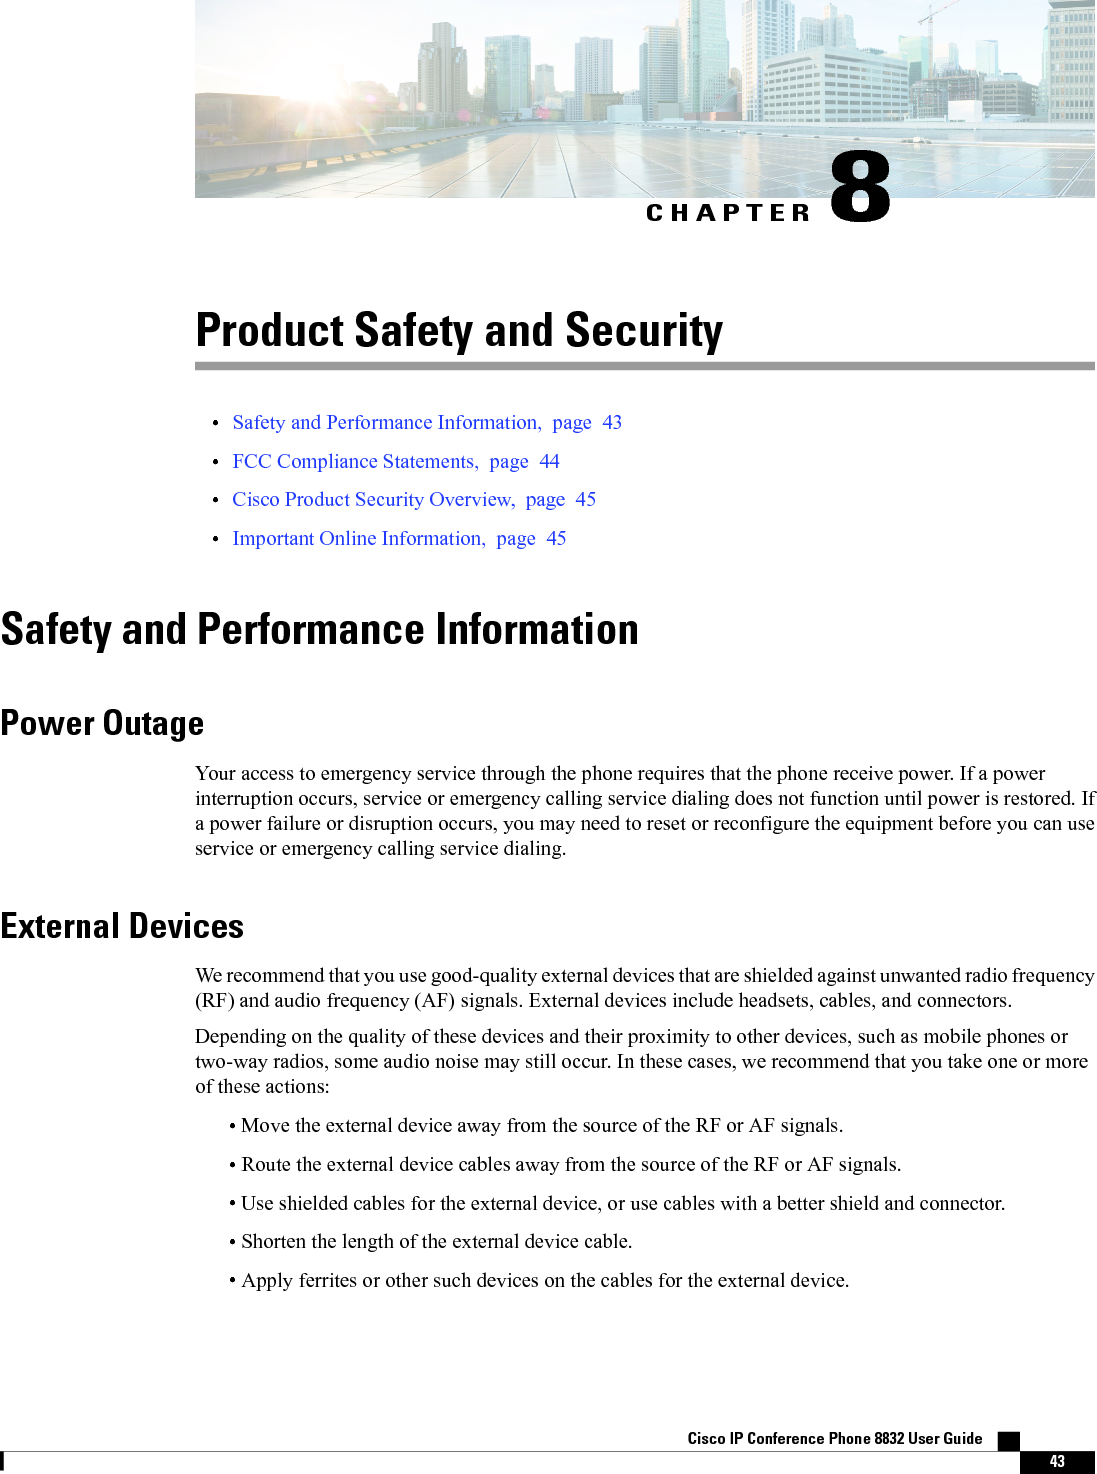 CHAPTER 8Product Safety and Security•Safety and Performance Information, page 43•FCC Compliance Statements, page 44•Cisco Product Security Overview, page 45•Important Online Information, page 45Safety and Performance InformationPower OutageYour access to emergency service through the phone requires that the phone receive power. If a powerinterruption occurs, service or emergency calling service dialing does not function until power is restored. Ifa power failure or disruption occurs, you may need to reset or reconfigure the equipment before you can useservice or emergency calling service dialing.External DevicesWe recommend that you use good-quality external devices that are shielded against unwanted radio frequency(RF) and audio frequency (AF) signals. External devices include headsets, cables, and connectors.Depending on the quality of these devices and their proximity to other devices, such as mobile phones ortwo-way radios, some audio noise may still occur. In these cases, we recommend that you take one or moreof these actions:•Move the external device away from the source of the RF or AF signals.•Route the external device cables away from the source of the RF or AF signals.•Use shielded cables for the external device, or use cables with a better shield and connector.•Shorten the length of the external device cable.•Apply ferrites or other such devices on the cables for the external device.Cisco IP Conference Phone 8832 User Guide    43